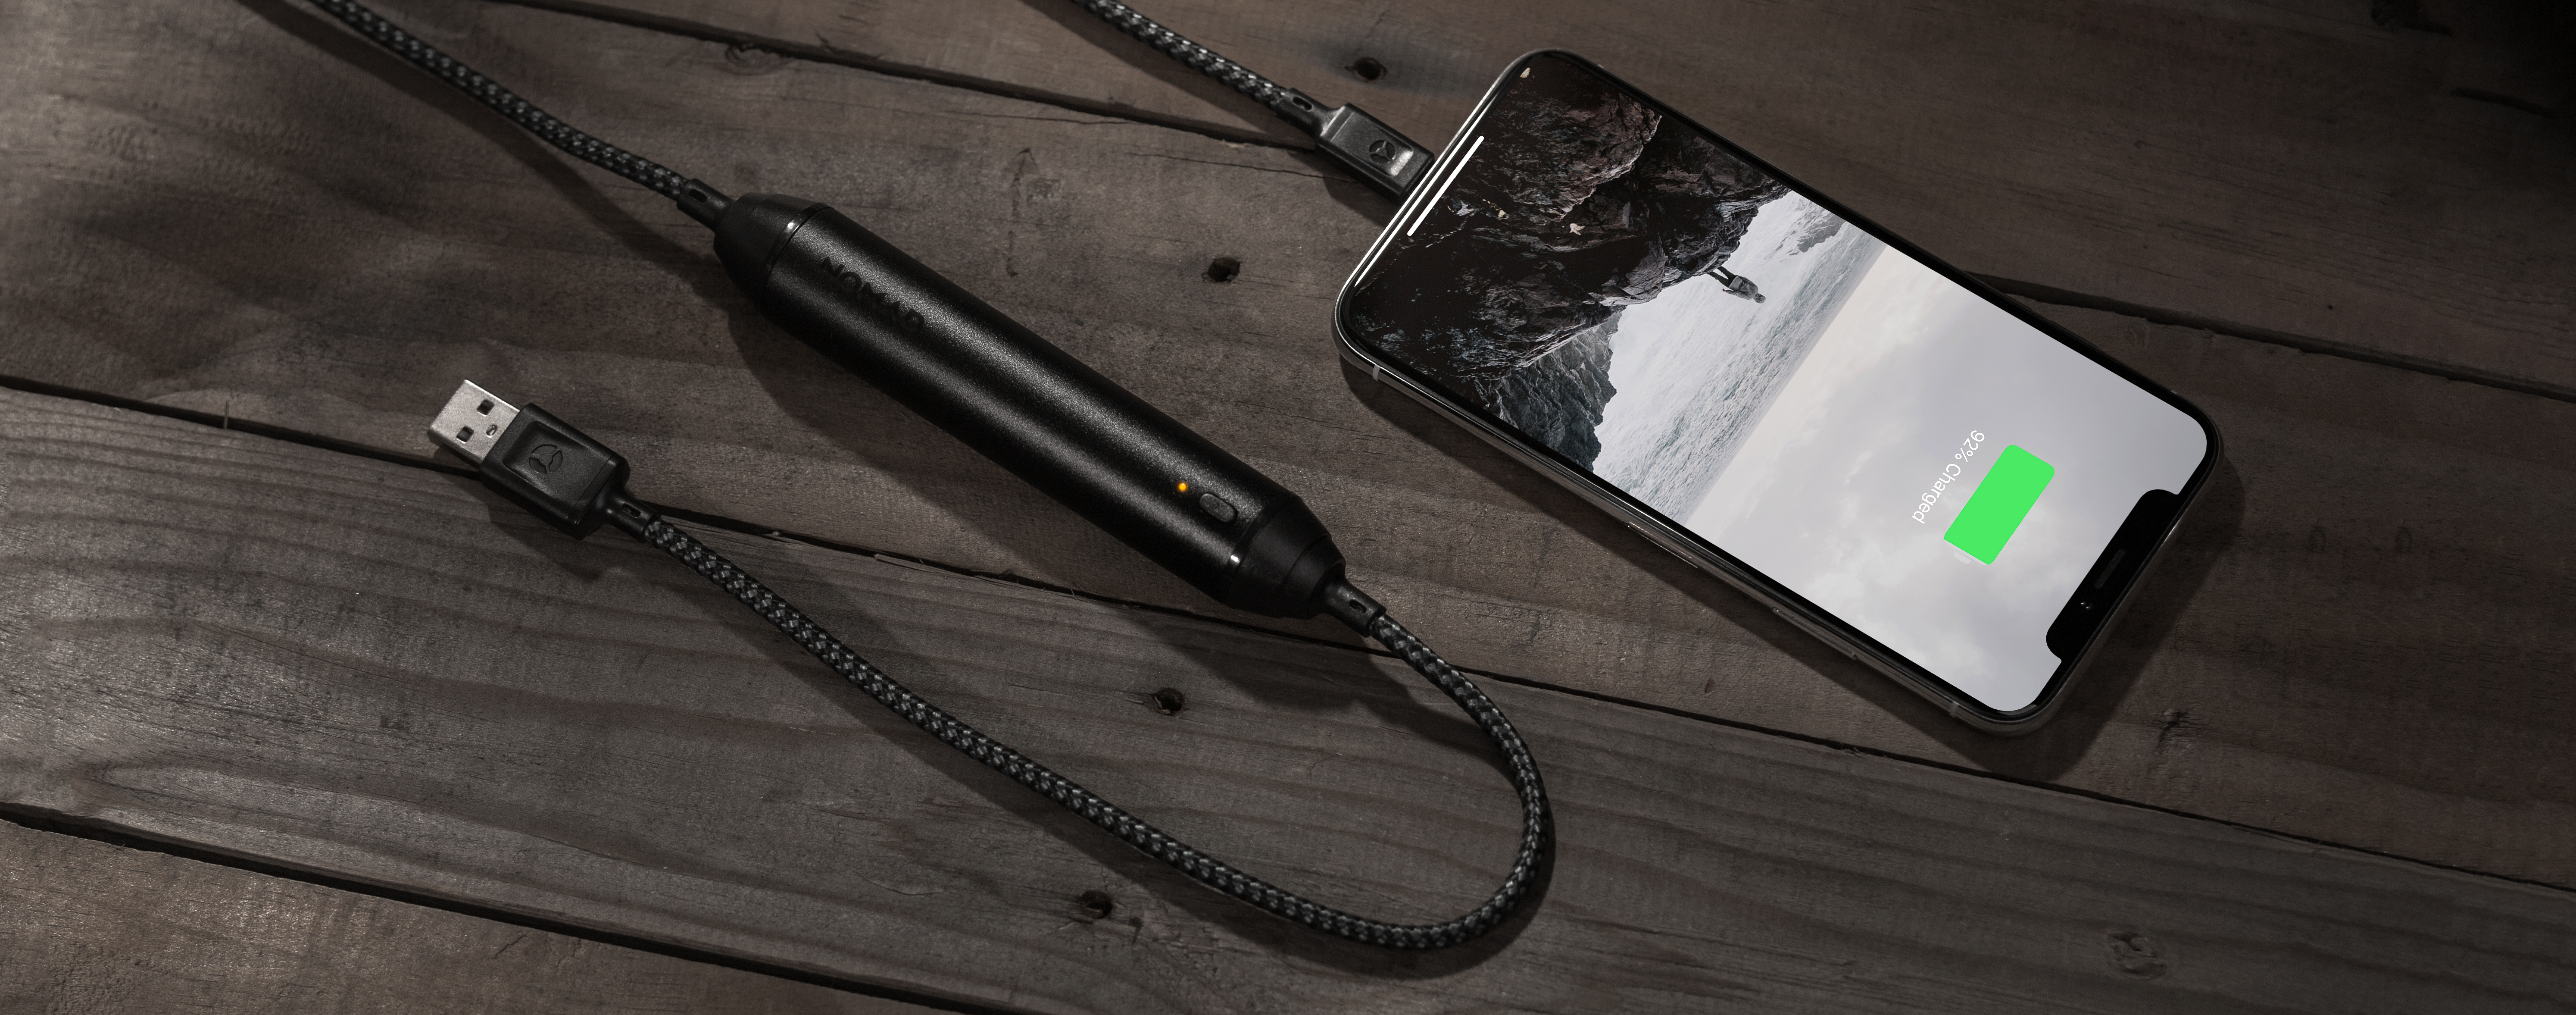 Nomad Announces Improved 2,800mAh Battery Cable for iPhone